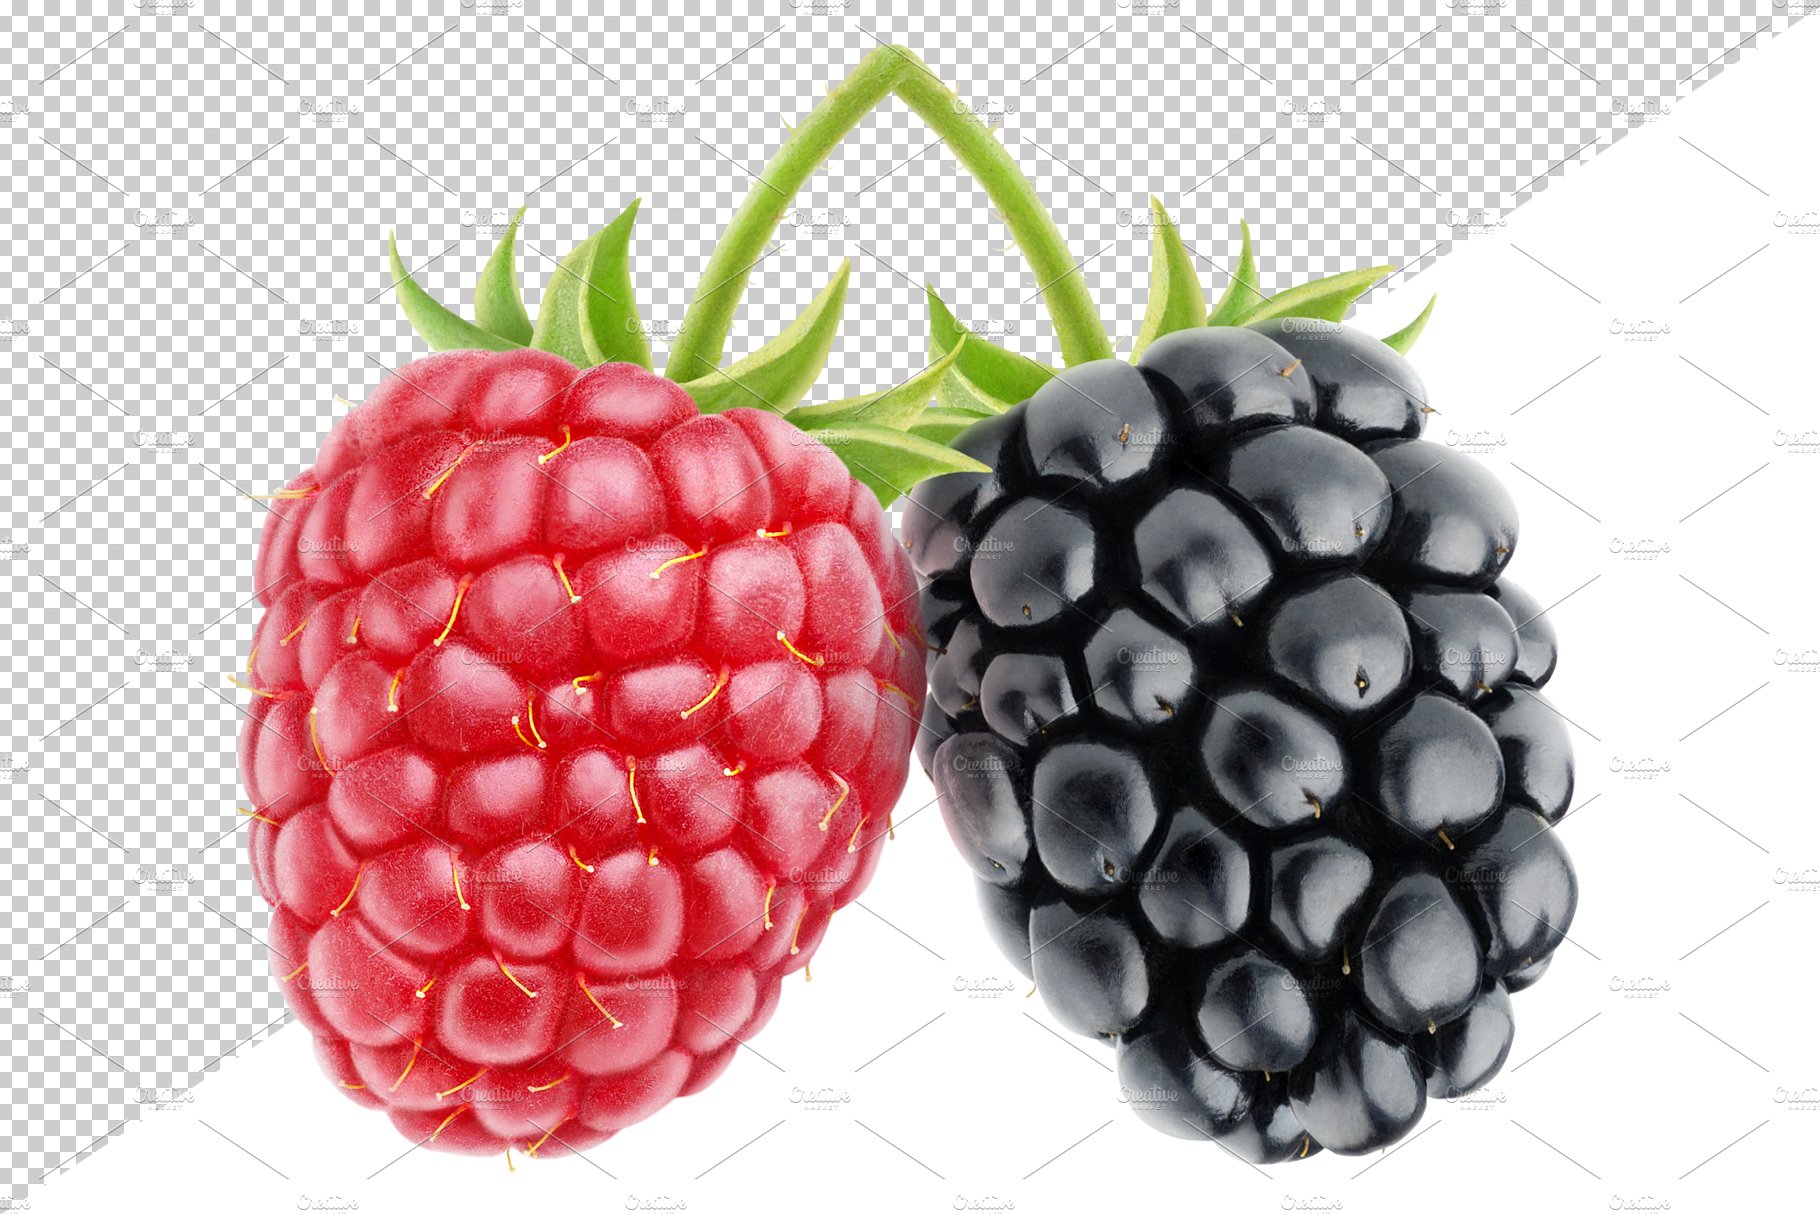 Blackberry and raspberry preview image.